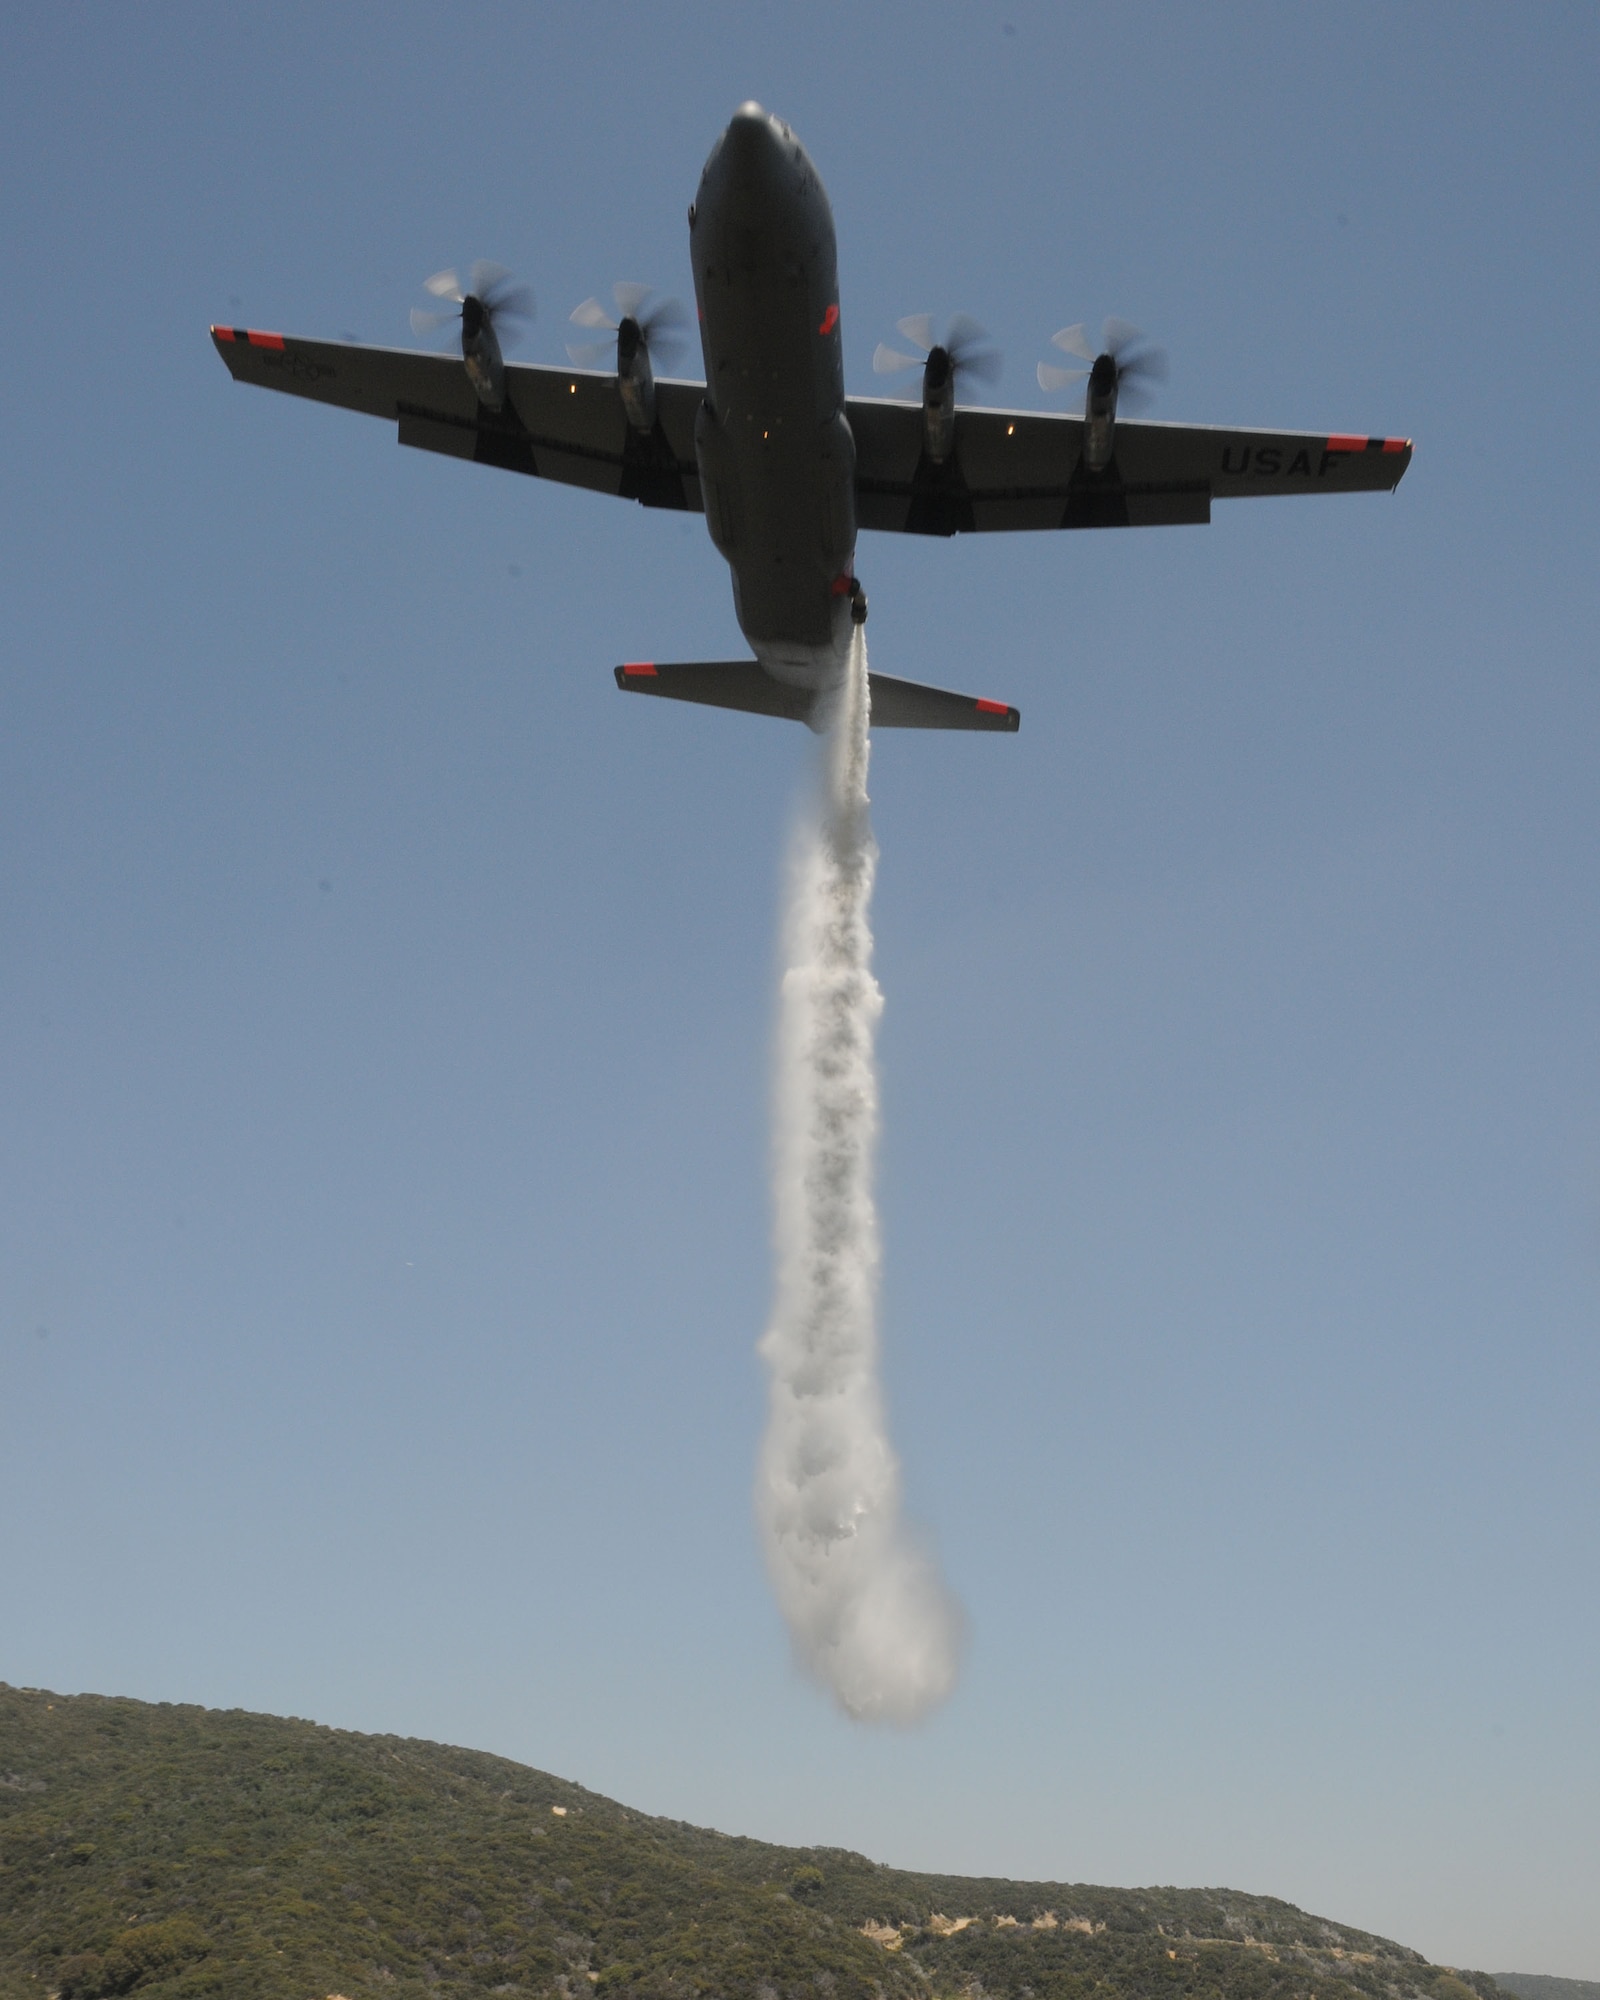 A C-130J from the 146th Airlift Wing, California Air National Guard, drops water over the Angeles Forest during Modular Airborne Firefighting System (MAFFS) training held June 7, 2011. The aircrews follow a U.S. Forest Service lead plane and demonstrate proficiency by dropping over a designated area. (Photo by Master Sgt. Dave Buttner)